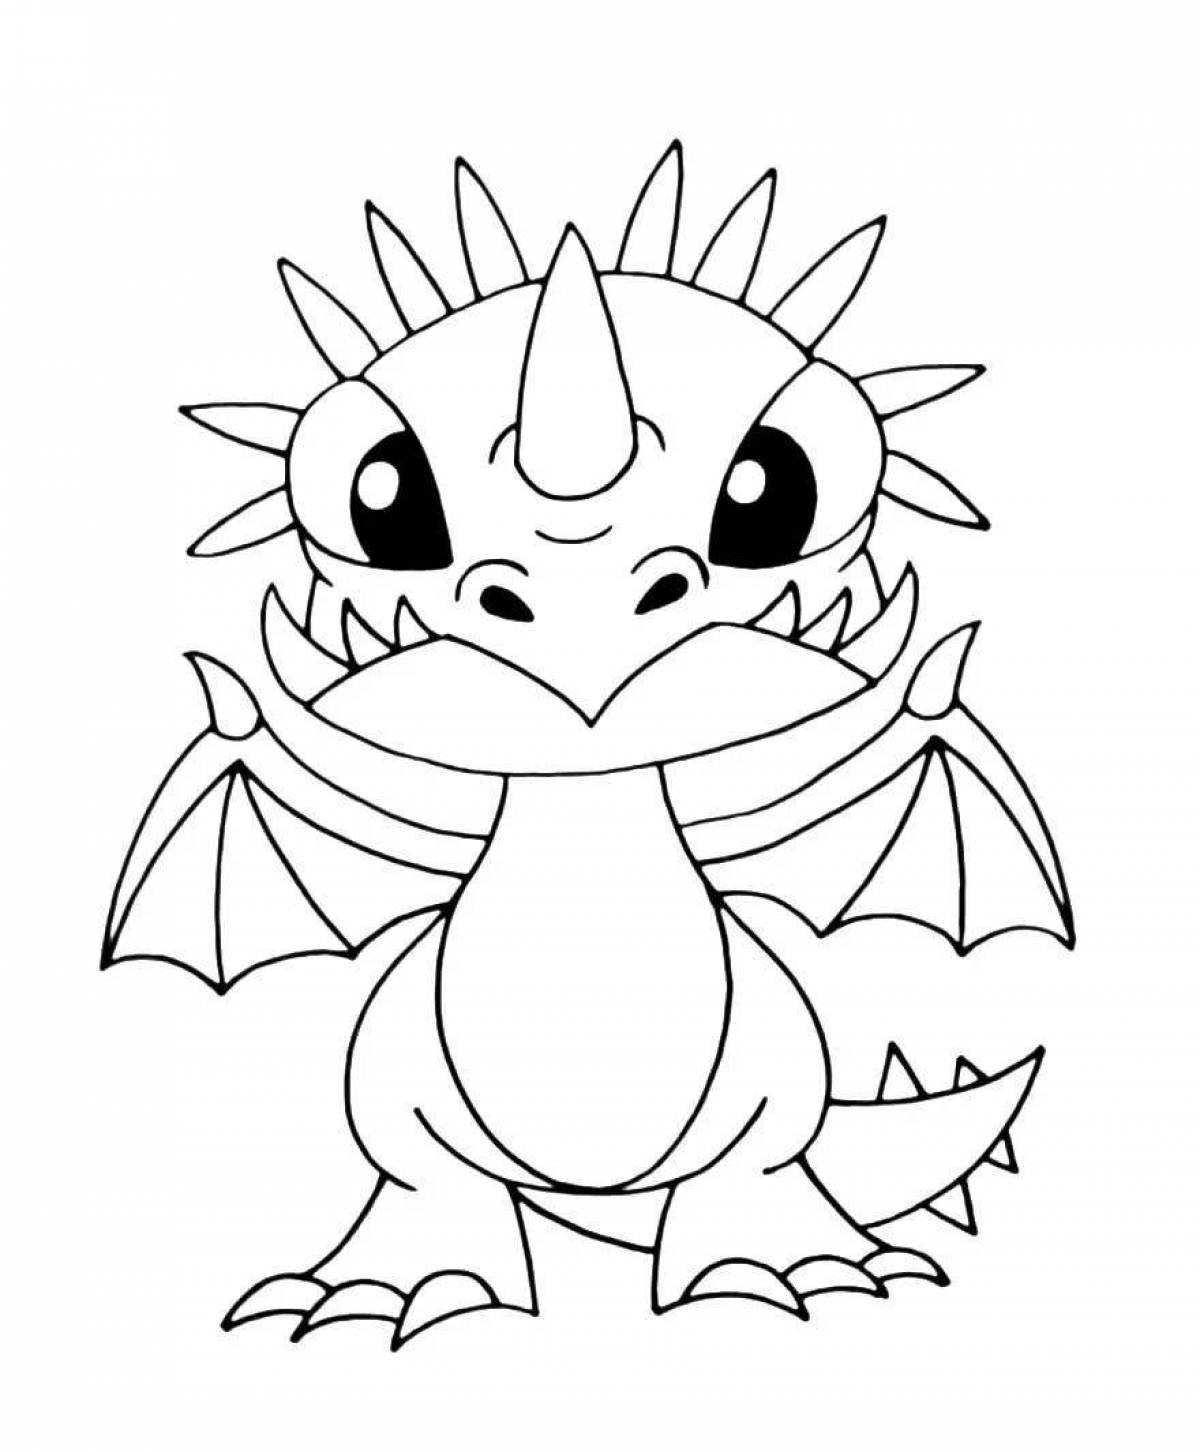 Quirky cute dragon coloring book